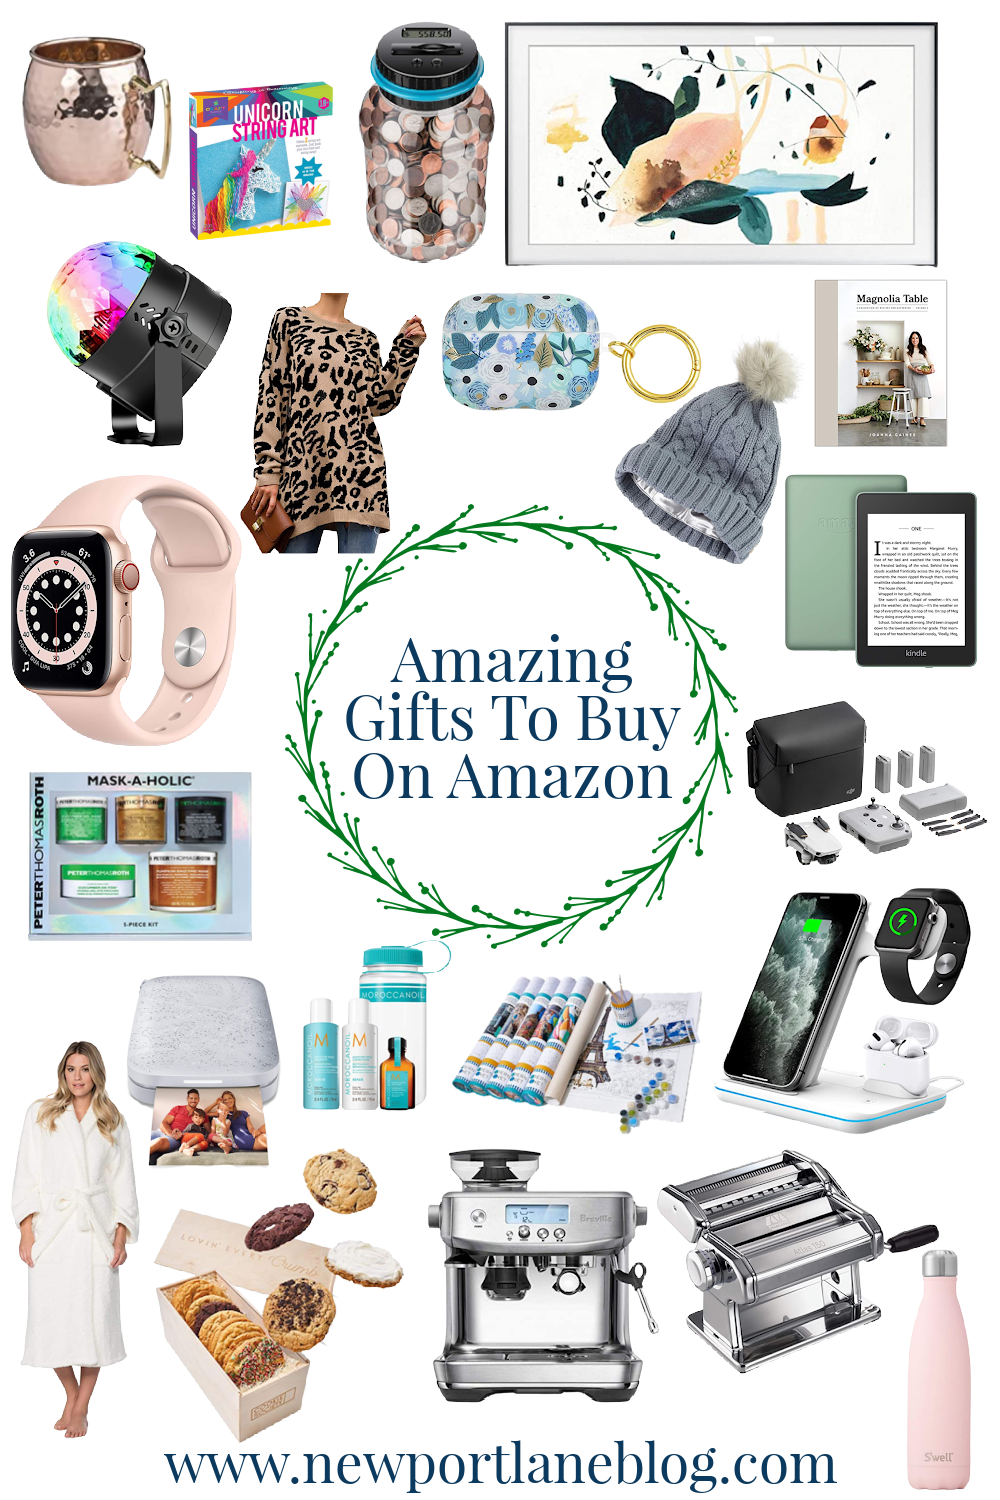 Amazing Gifts to Buy on